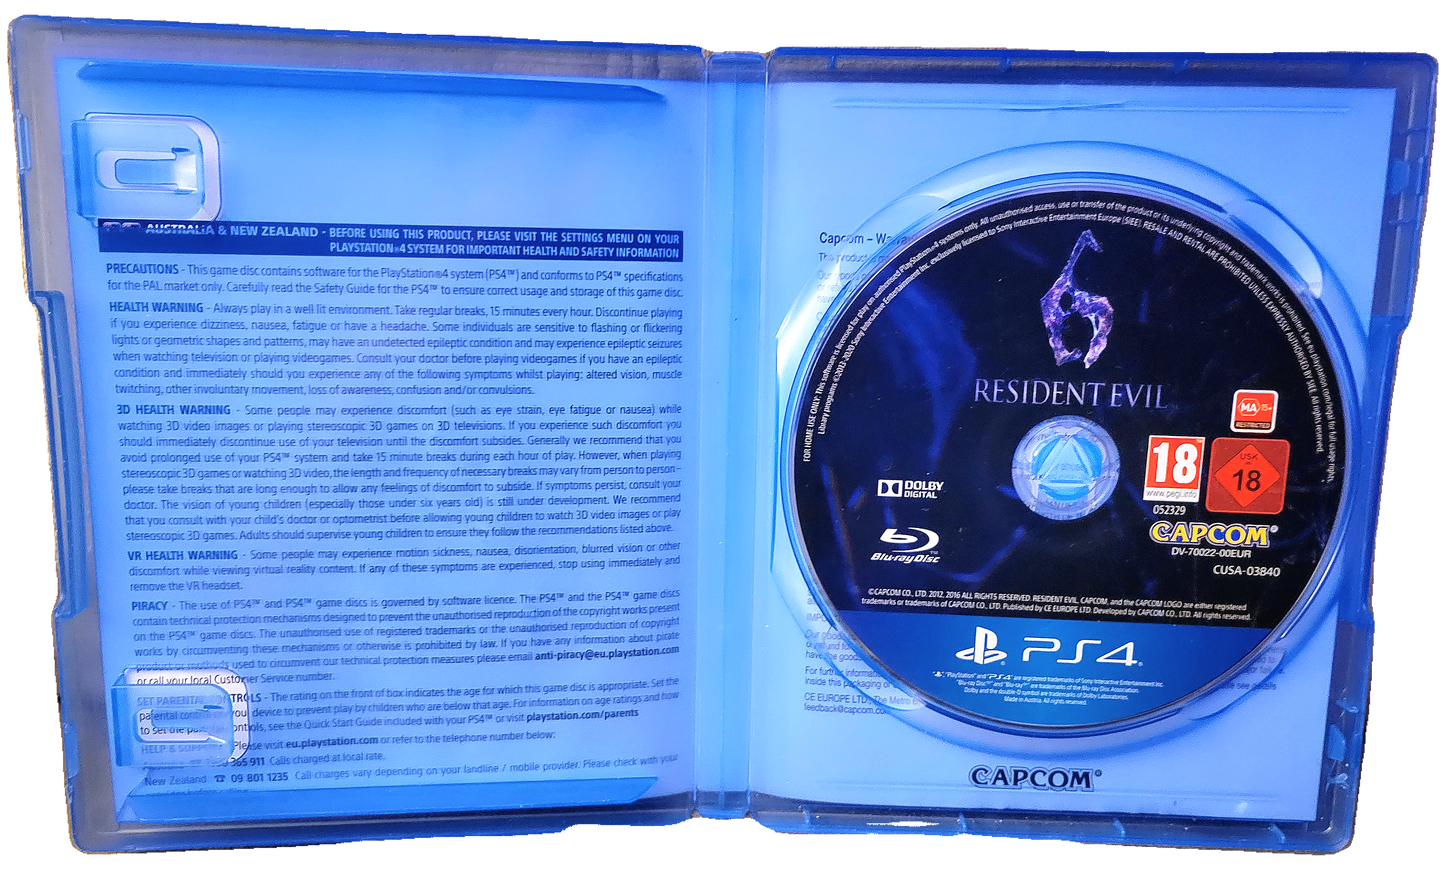 Playstation 4 Resident Evil 6 (Includes All Map and Multi-player DLC) Used Video Game